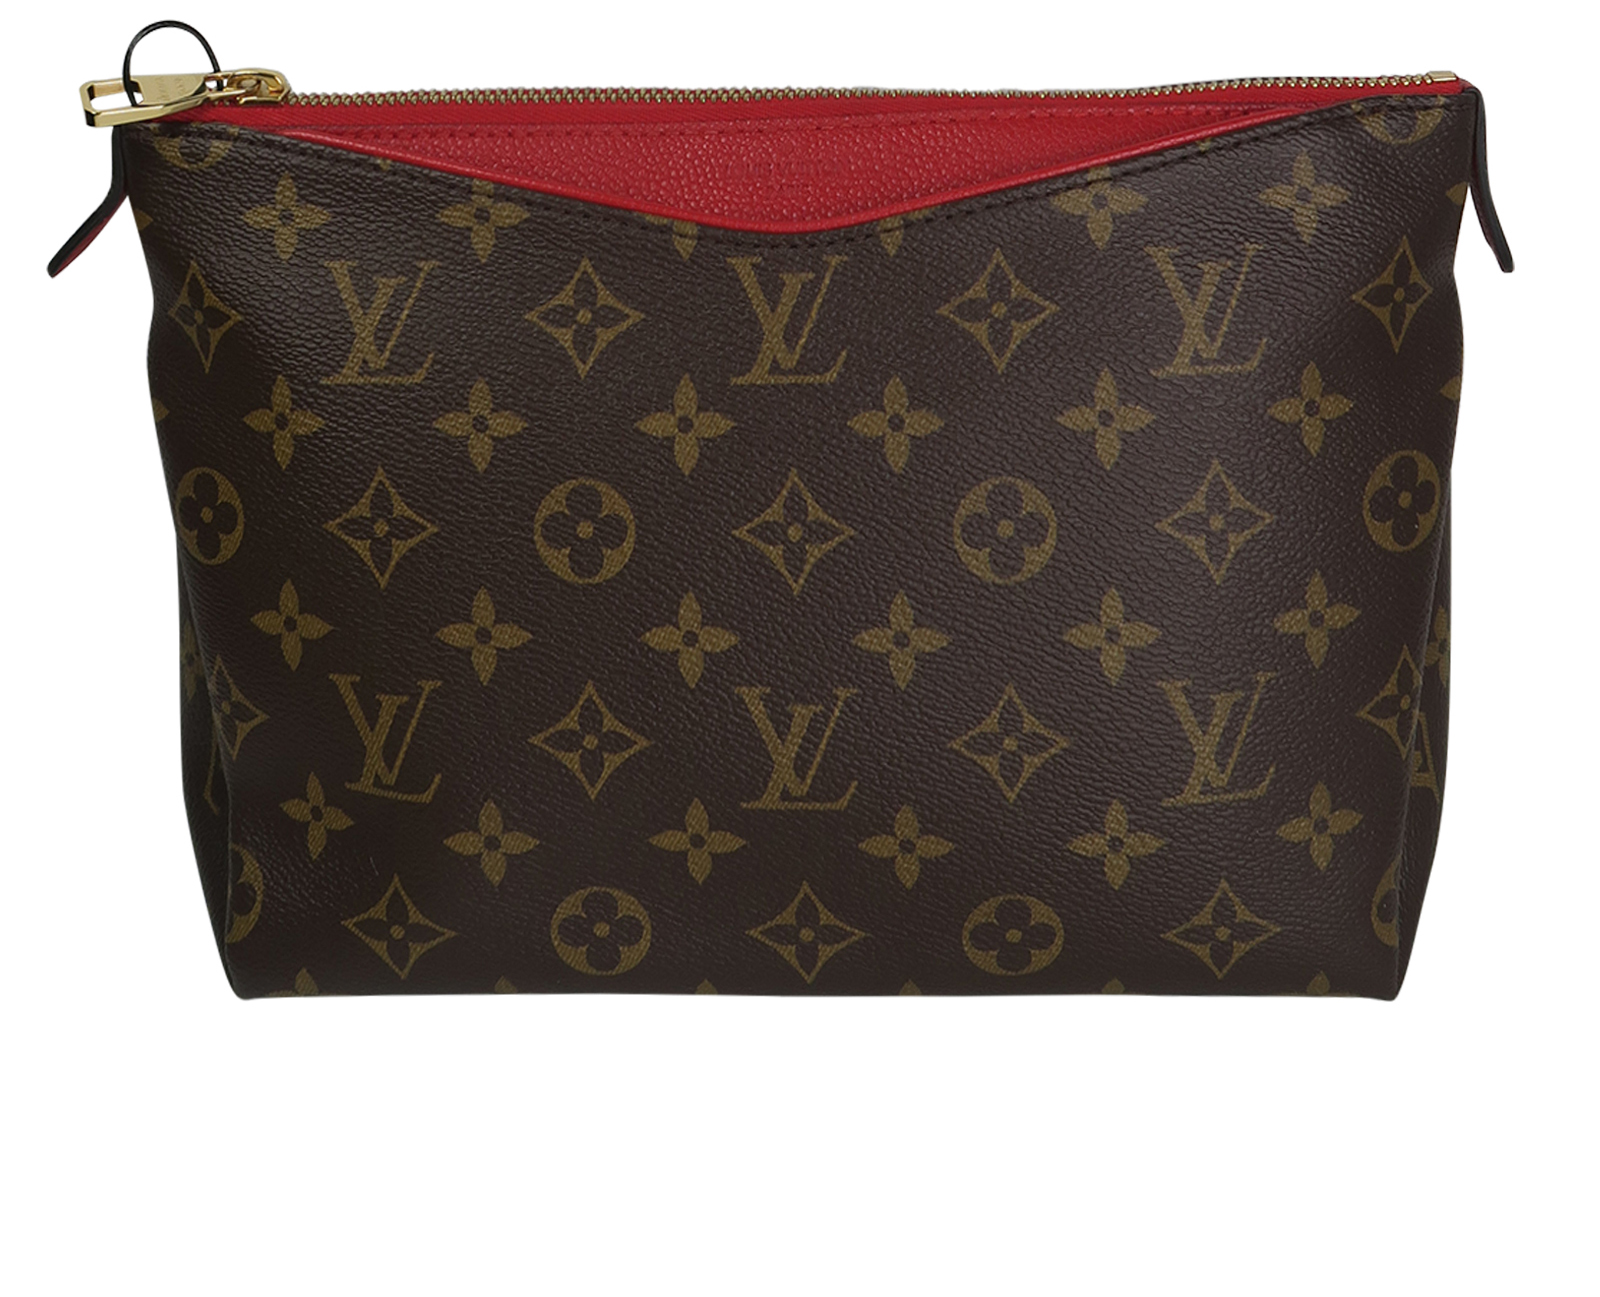 Products By Louis Vuitton: Pallas Beauty Case